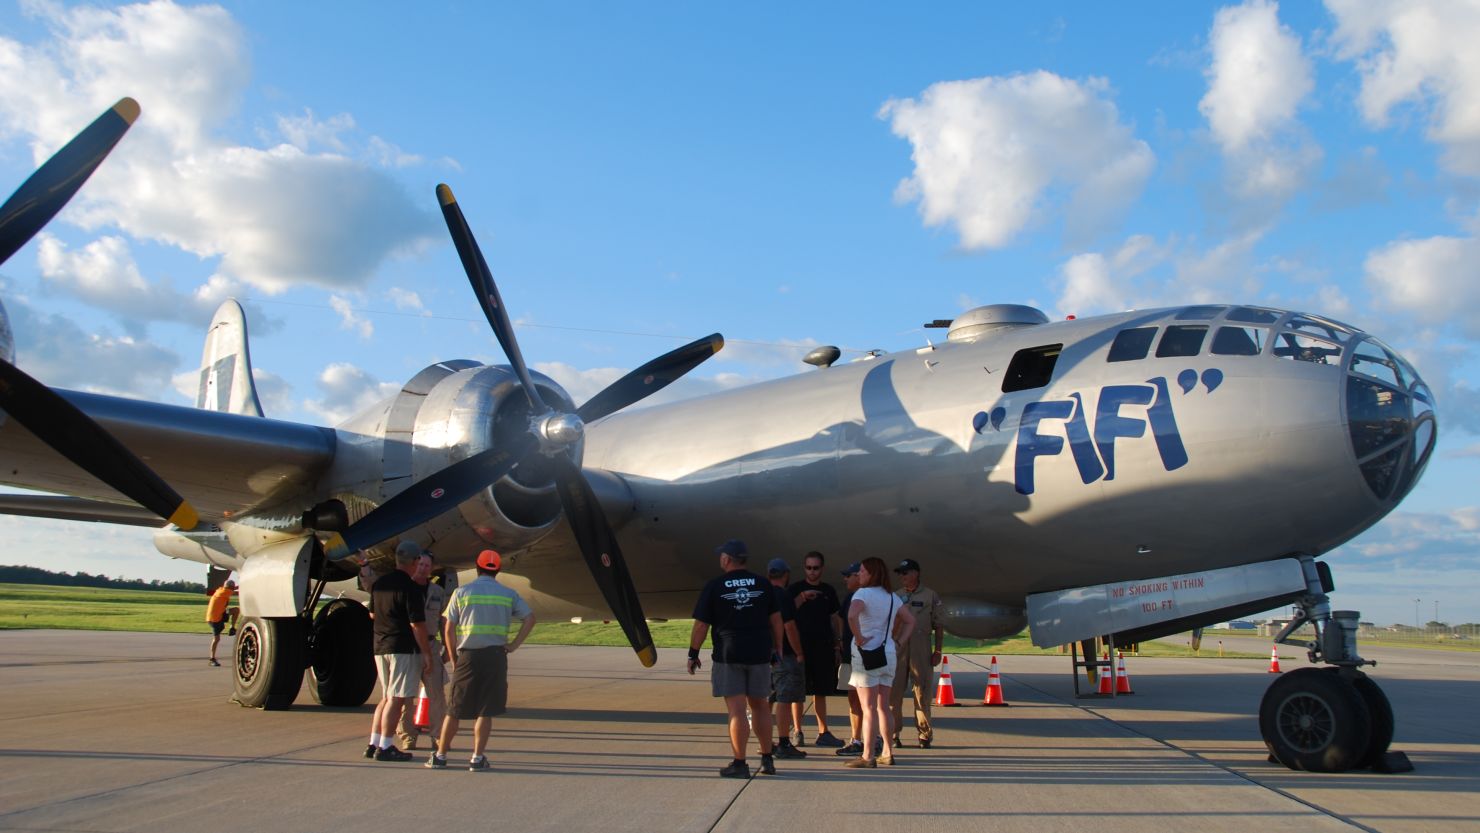 'FIFI' is a World War II-era bomber that's billed as the last flying B-29 Superfortress.